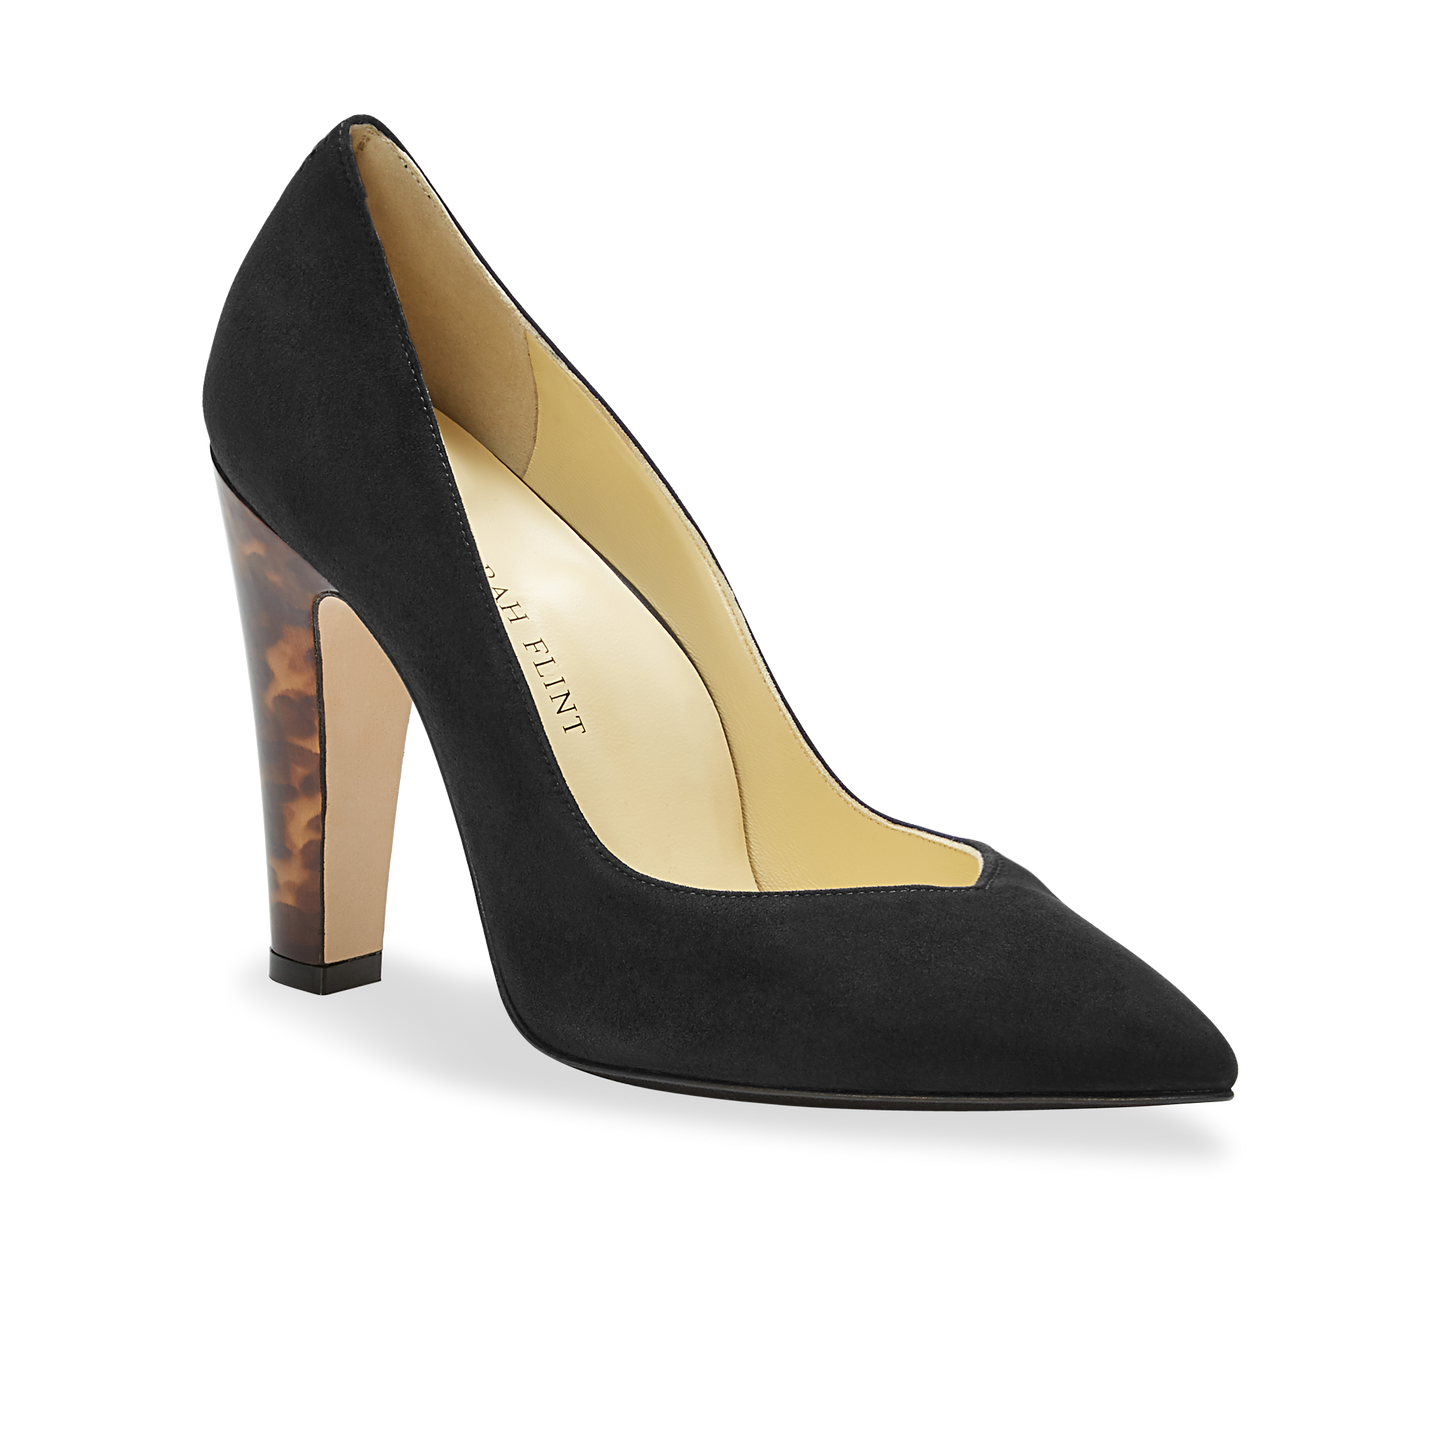 100mm Italian Made Pointed Toe Jay Pump in Black Suede